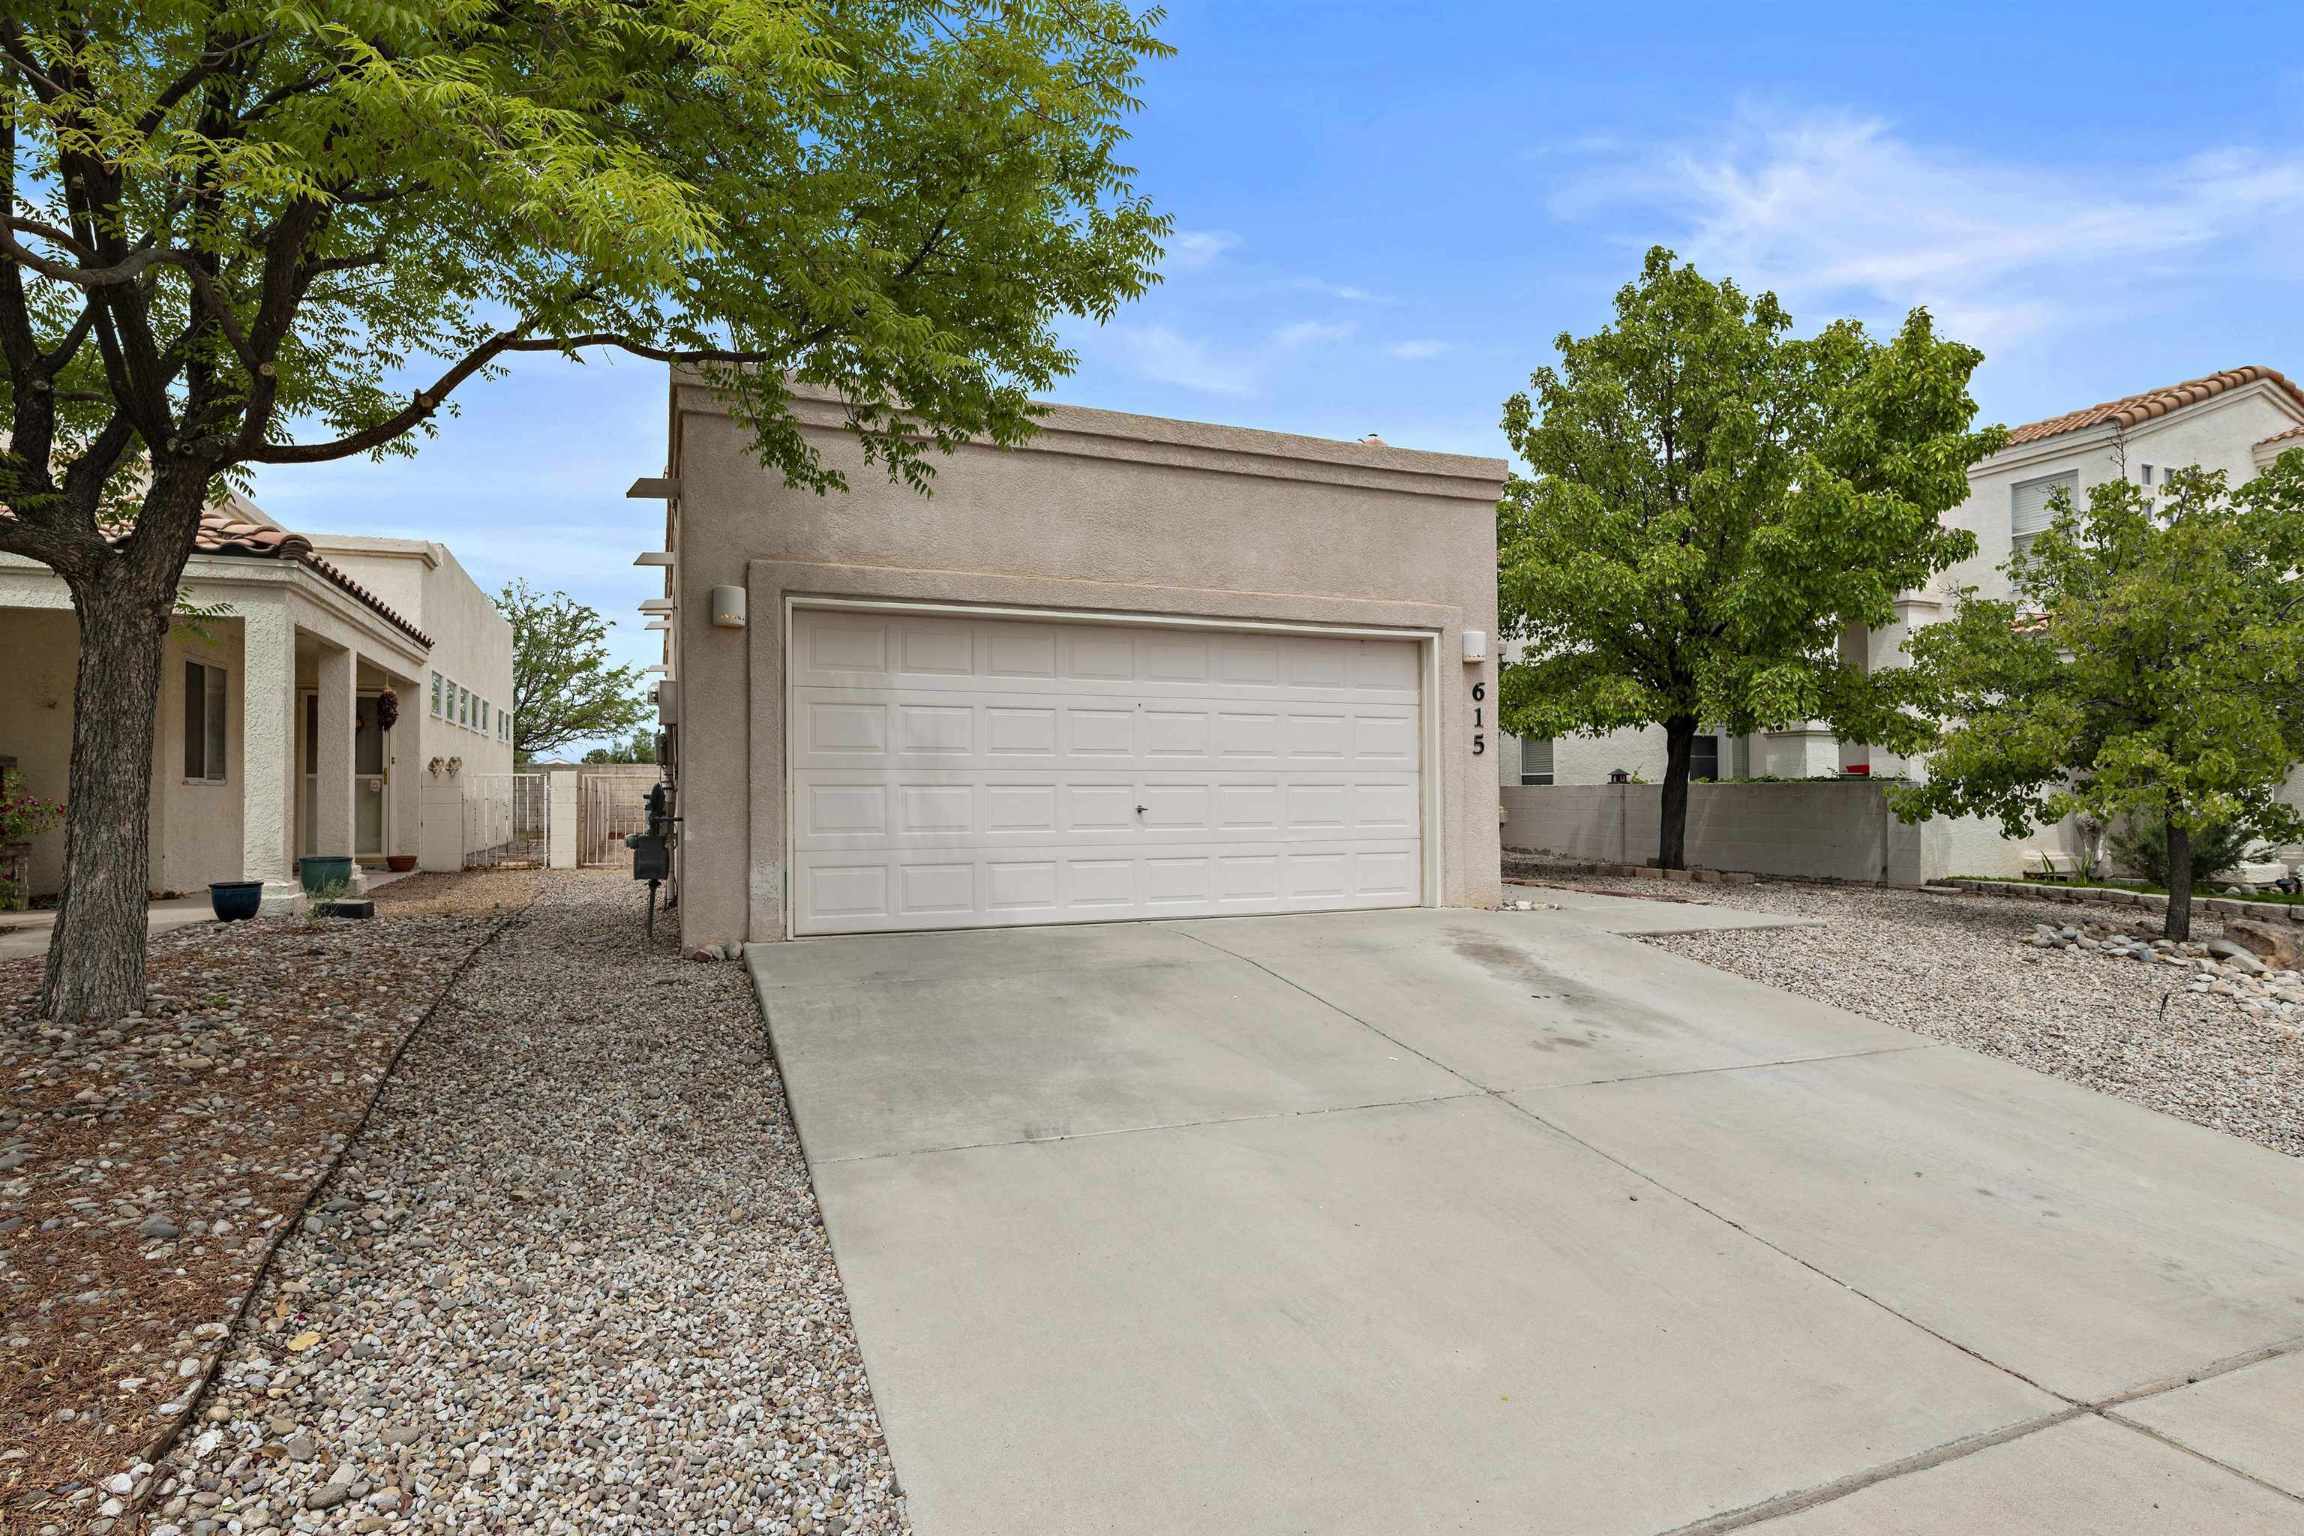 615 Hermit Falls Drive, Rio Rancho, New Mexico 87144, 4 Bedrooms Bedrooms, ,3 BathroomsBathrooms,Residential,For Sale,615 Hermit Falls Drive,202201844